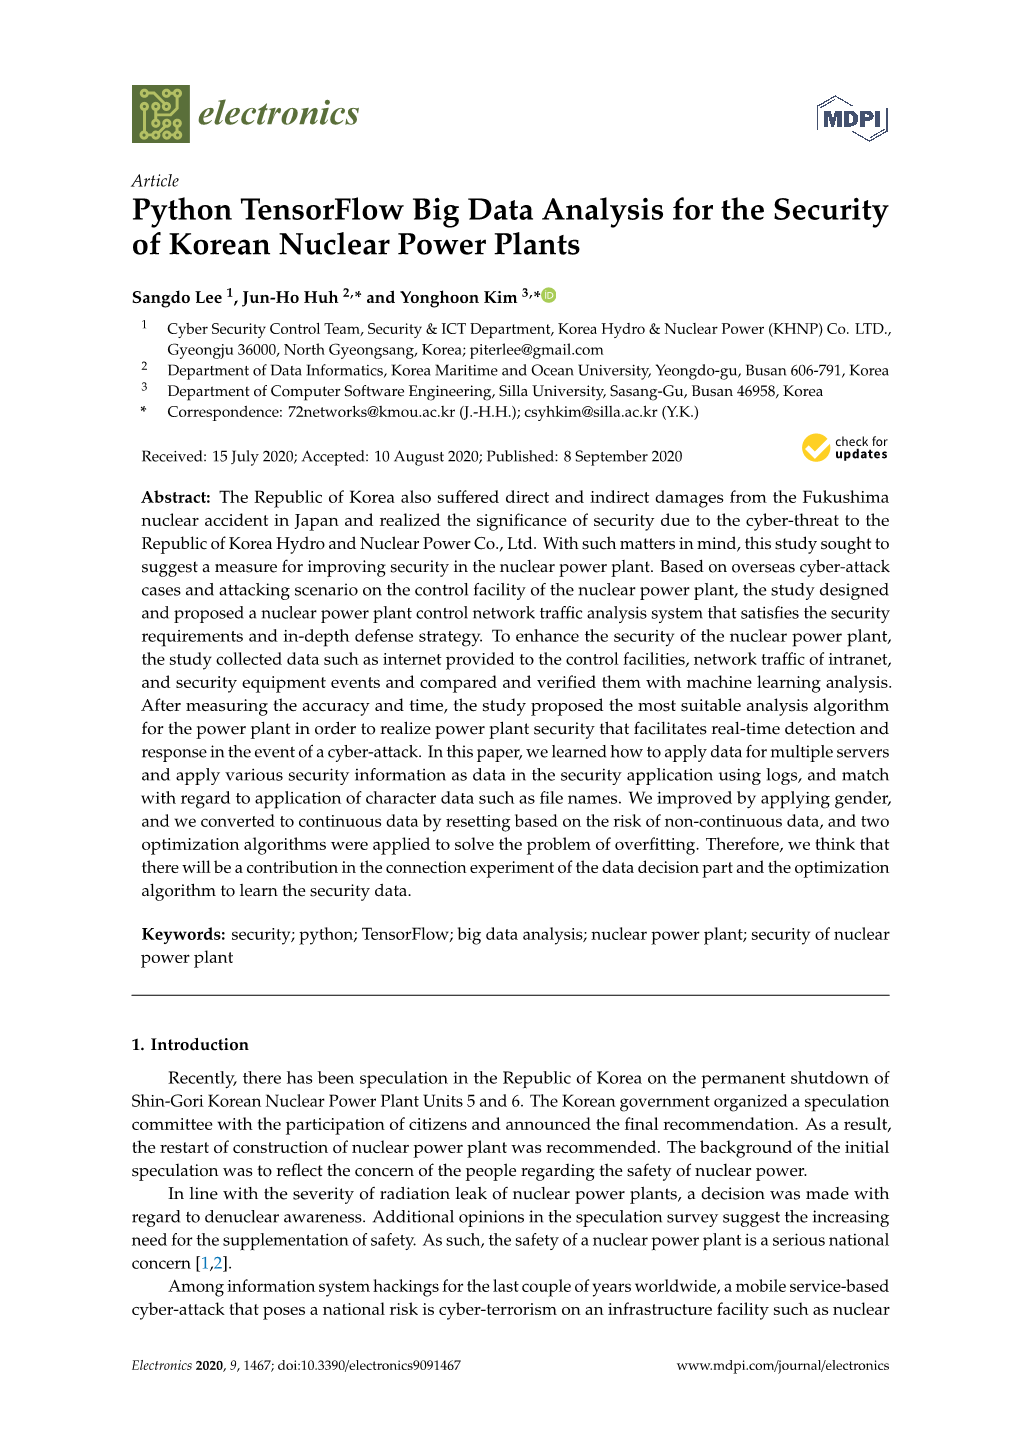 Python Tensorflow Big Data Analysis for the Security of Korean Nuclear Power Plants